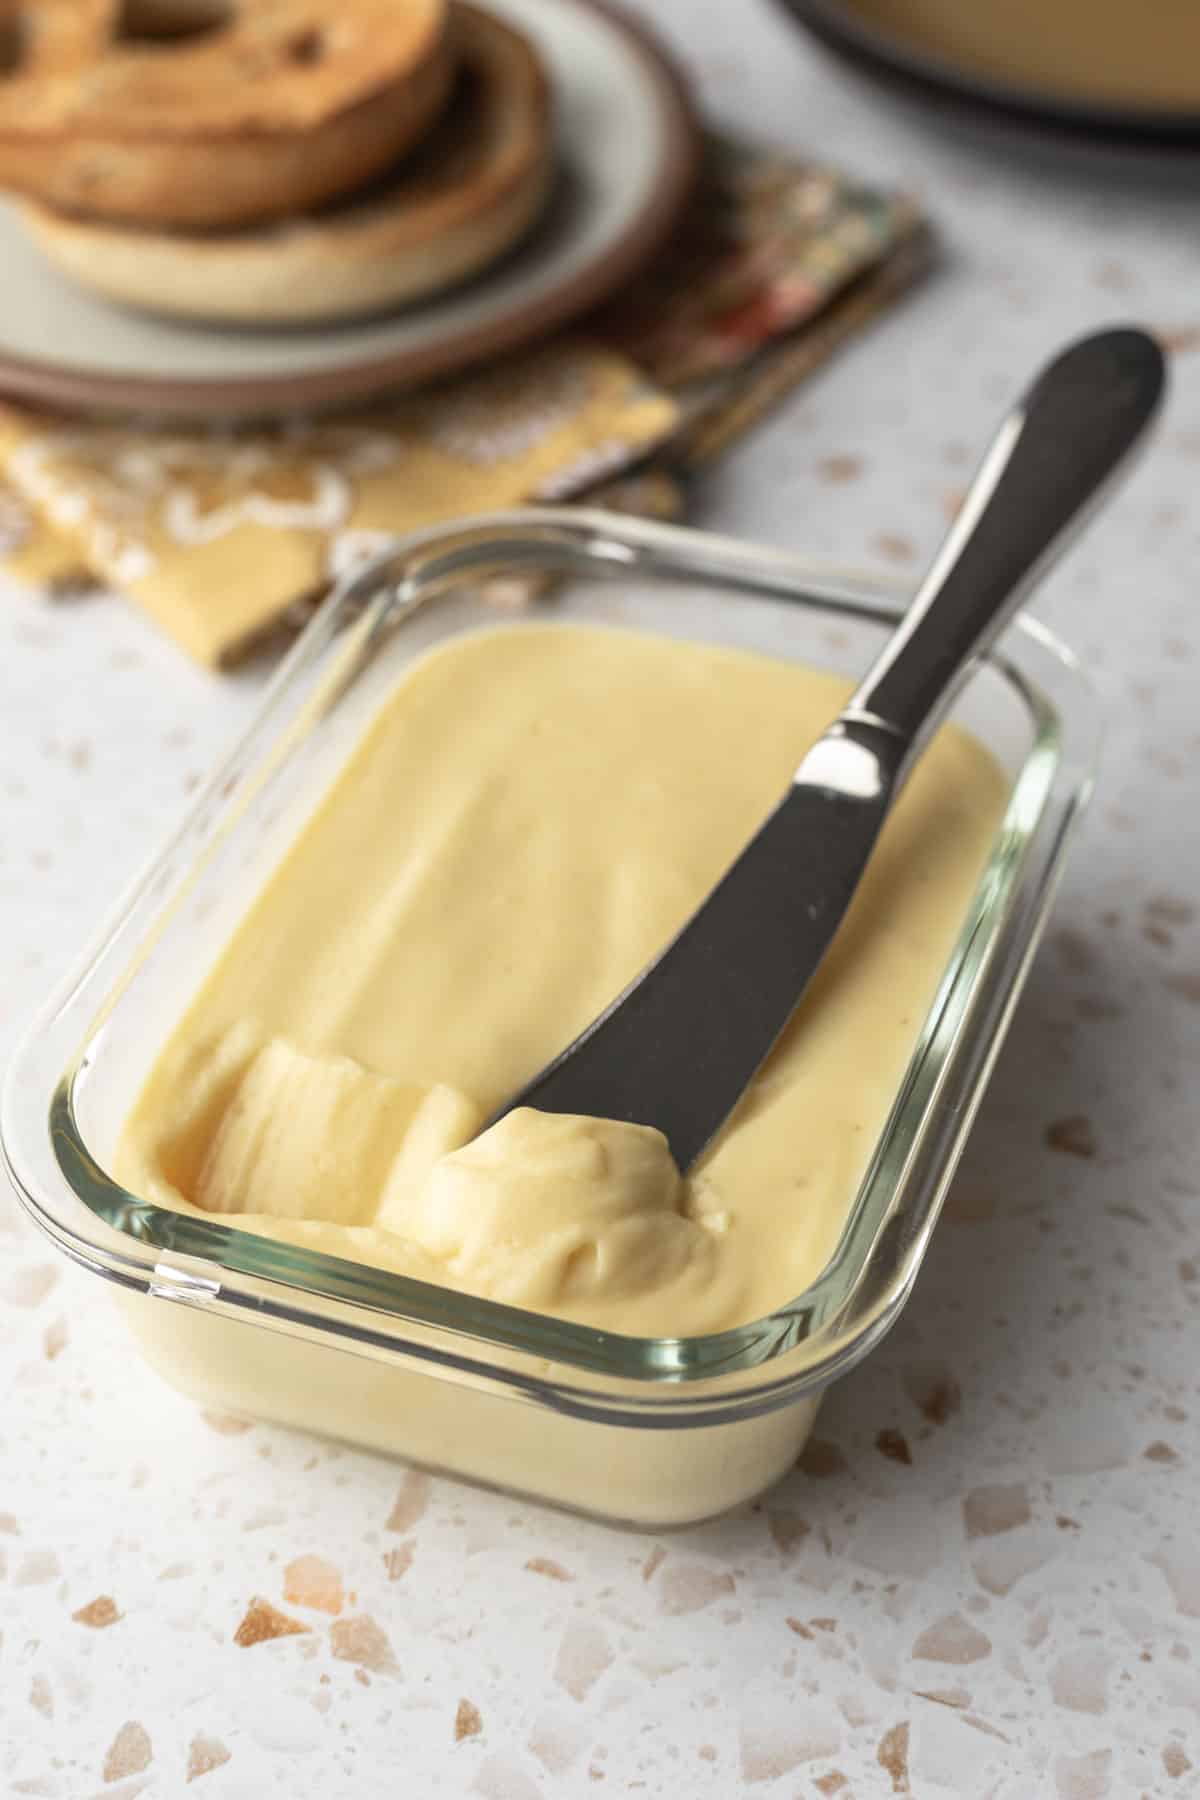 oil-free vegan butter in a glass container with a knife for spreading.